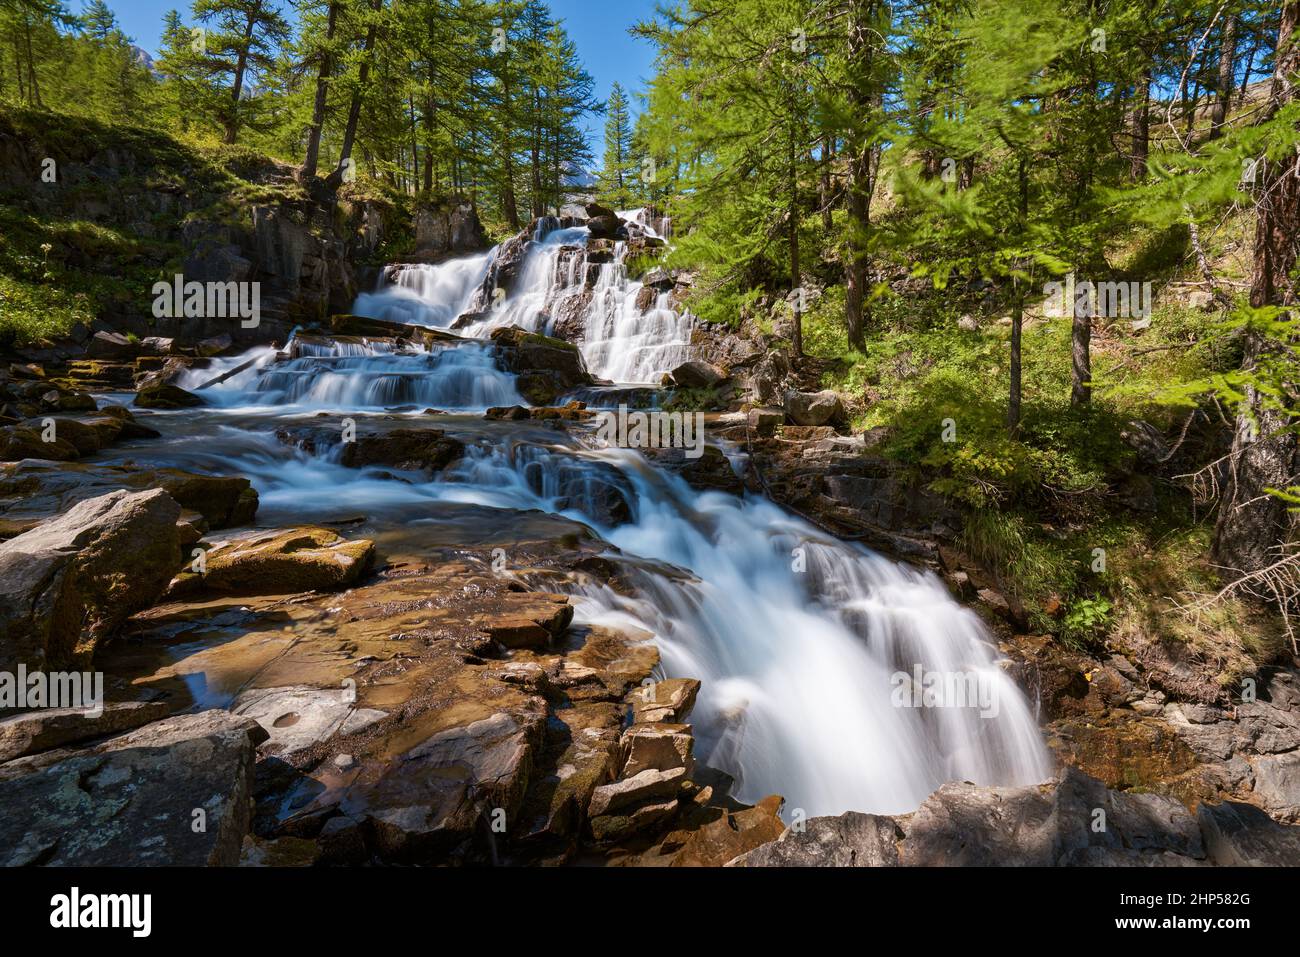 Fontcouverte Waterfall in the Claree Valley surrounded by larch trees in summer. Vallée de la Clarée in Hautes Alpes (Cerces Massif), Alps, France Stock Photo